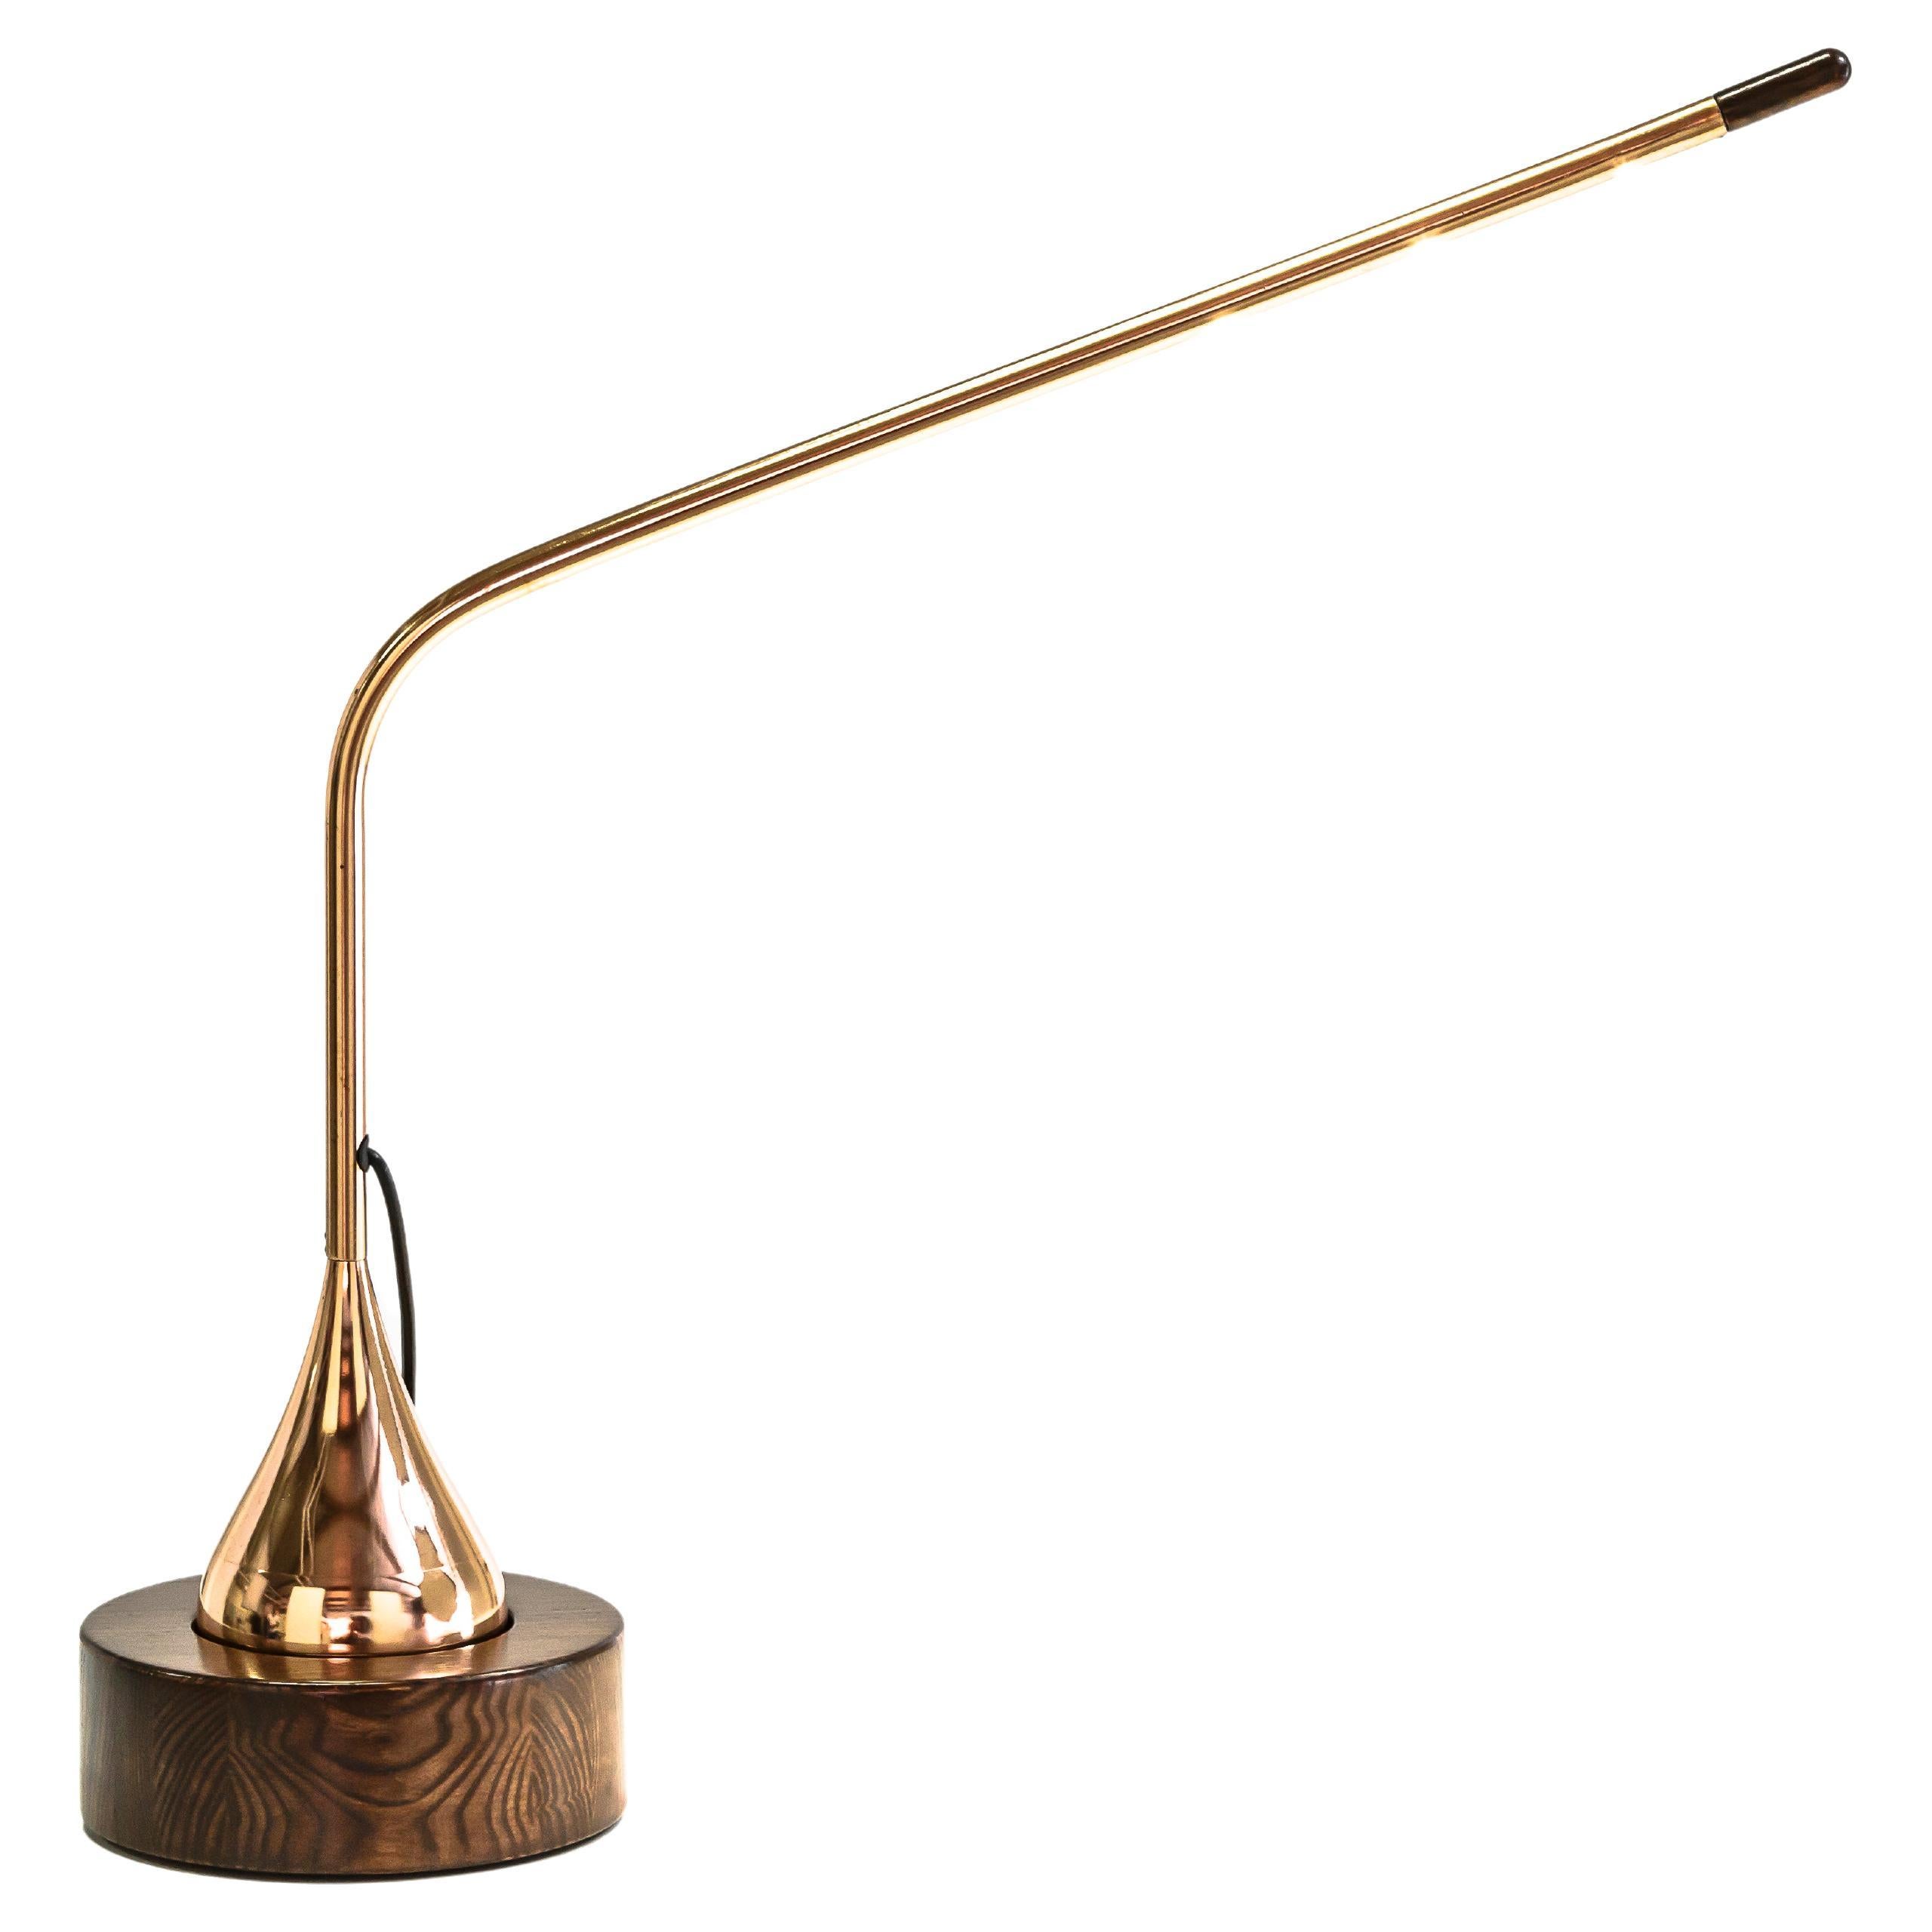 Mortar & Pestle Table Lamp by Egg Designs